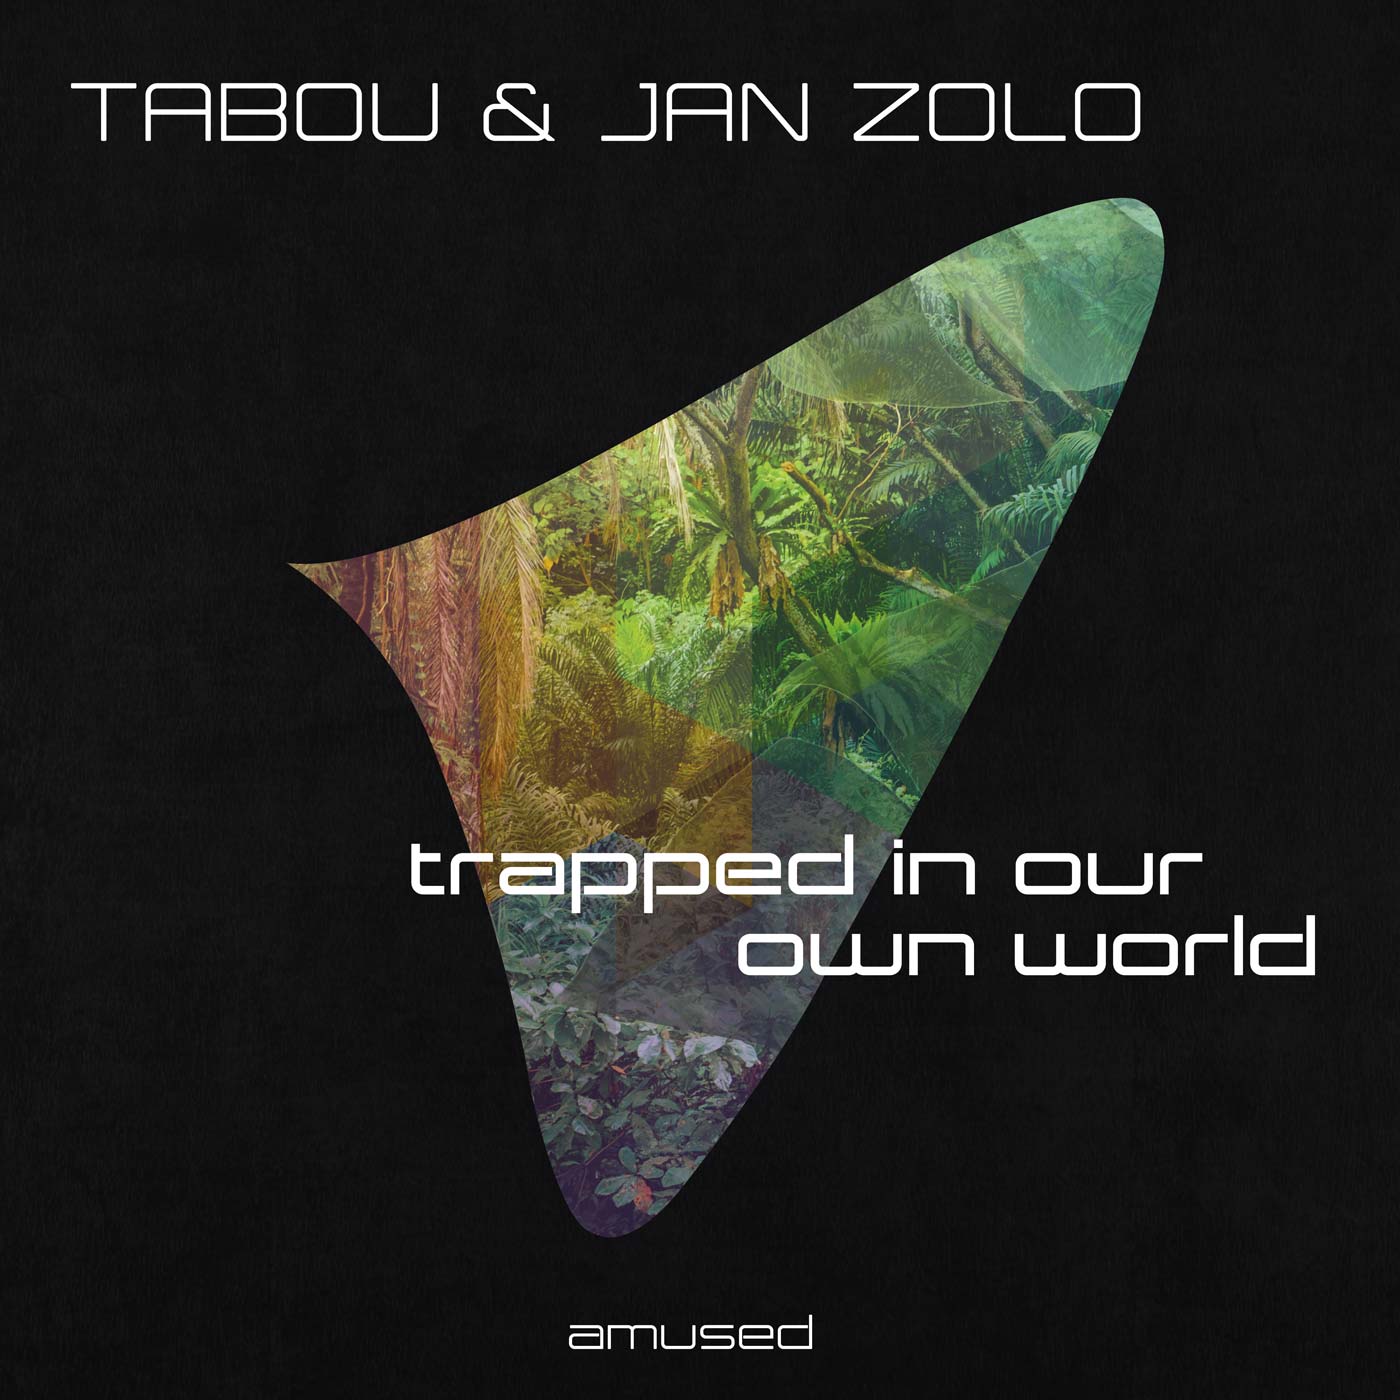 TABOU & JAN ZOLO trapped in our own world